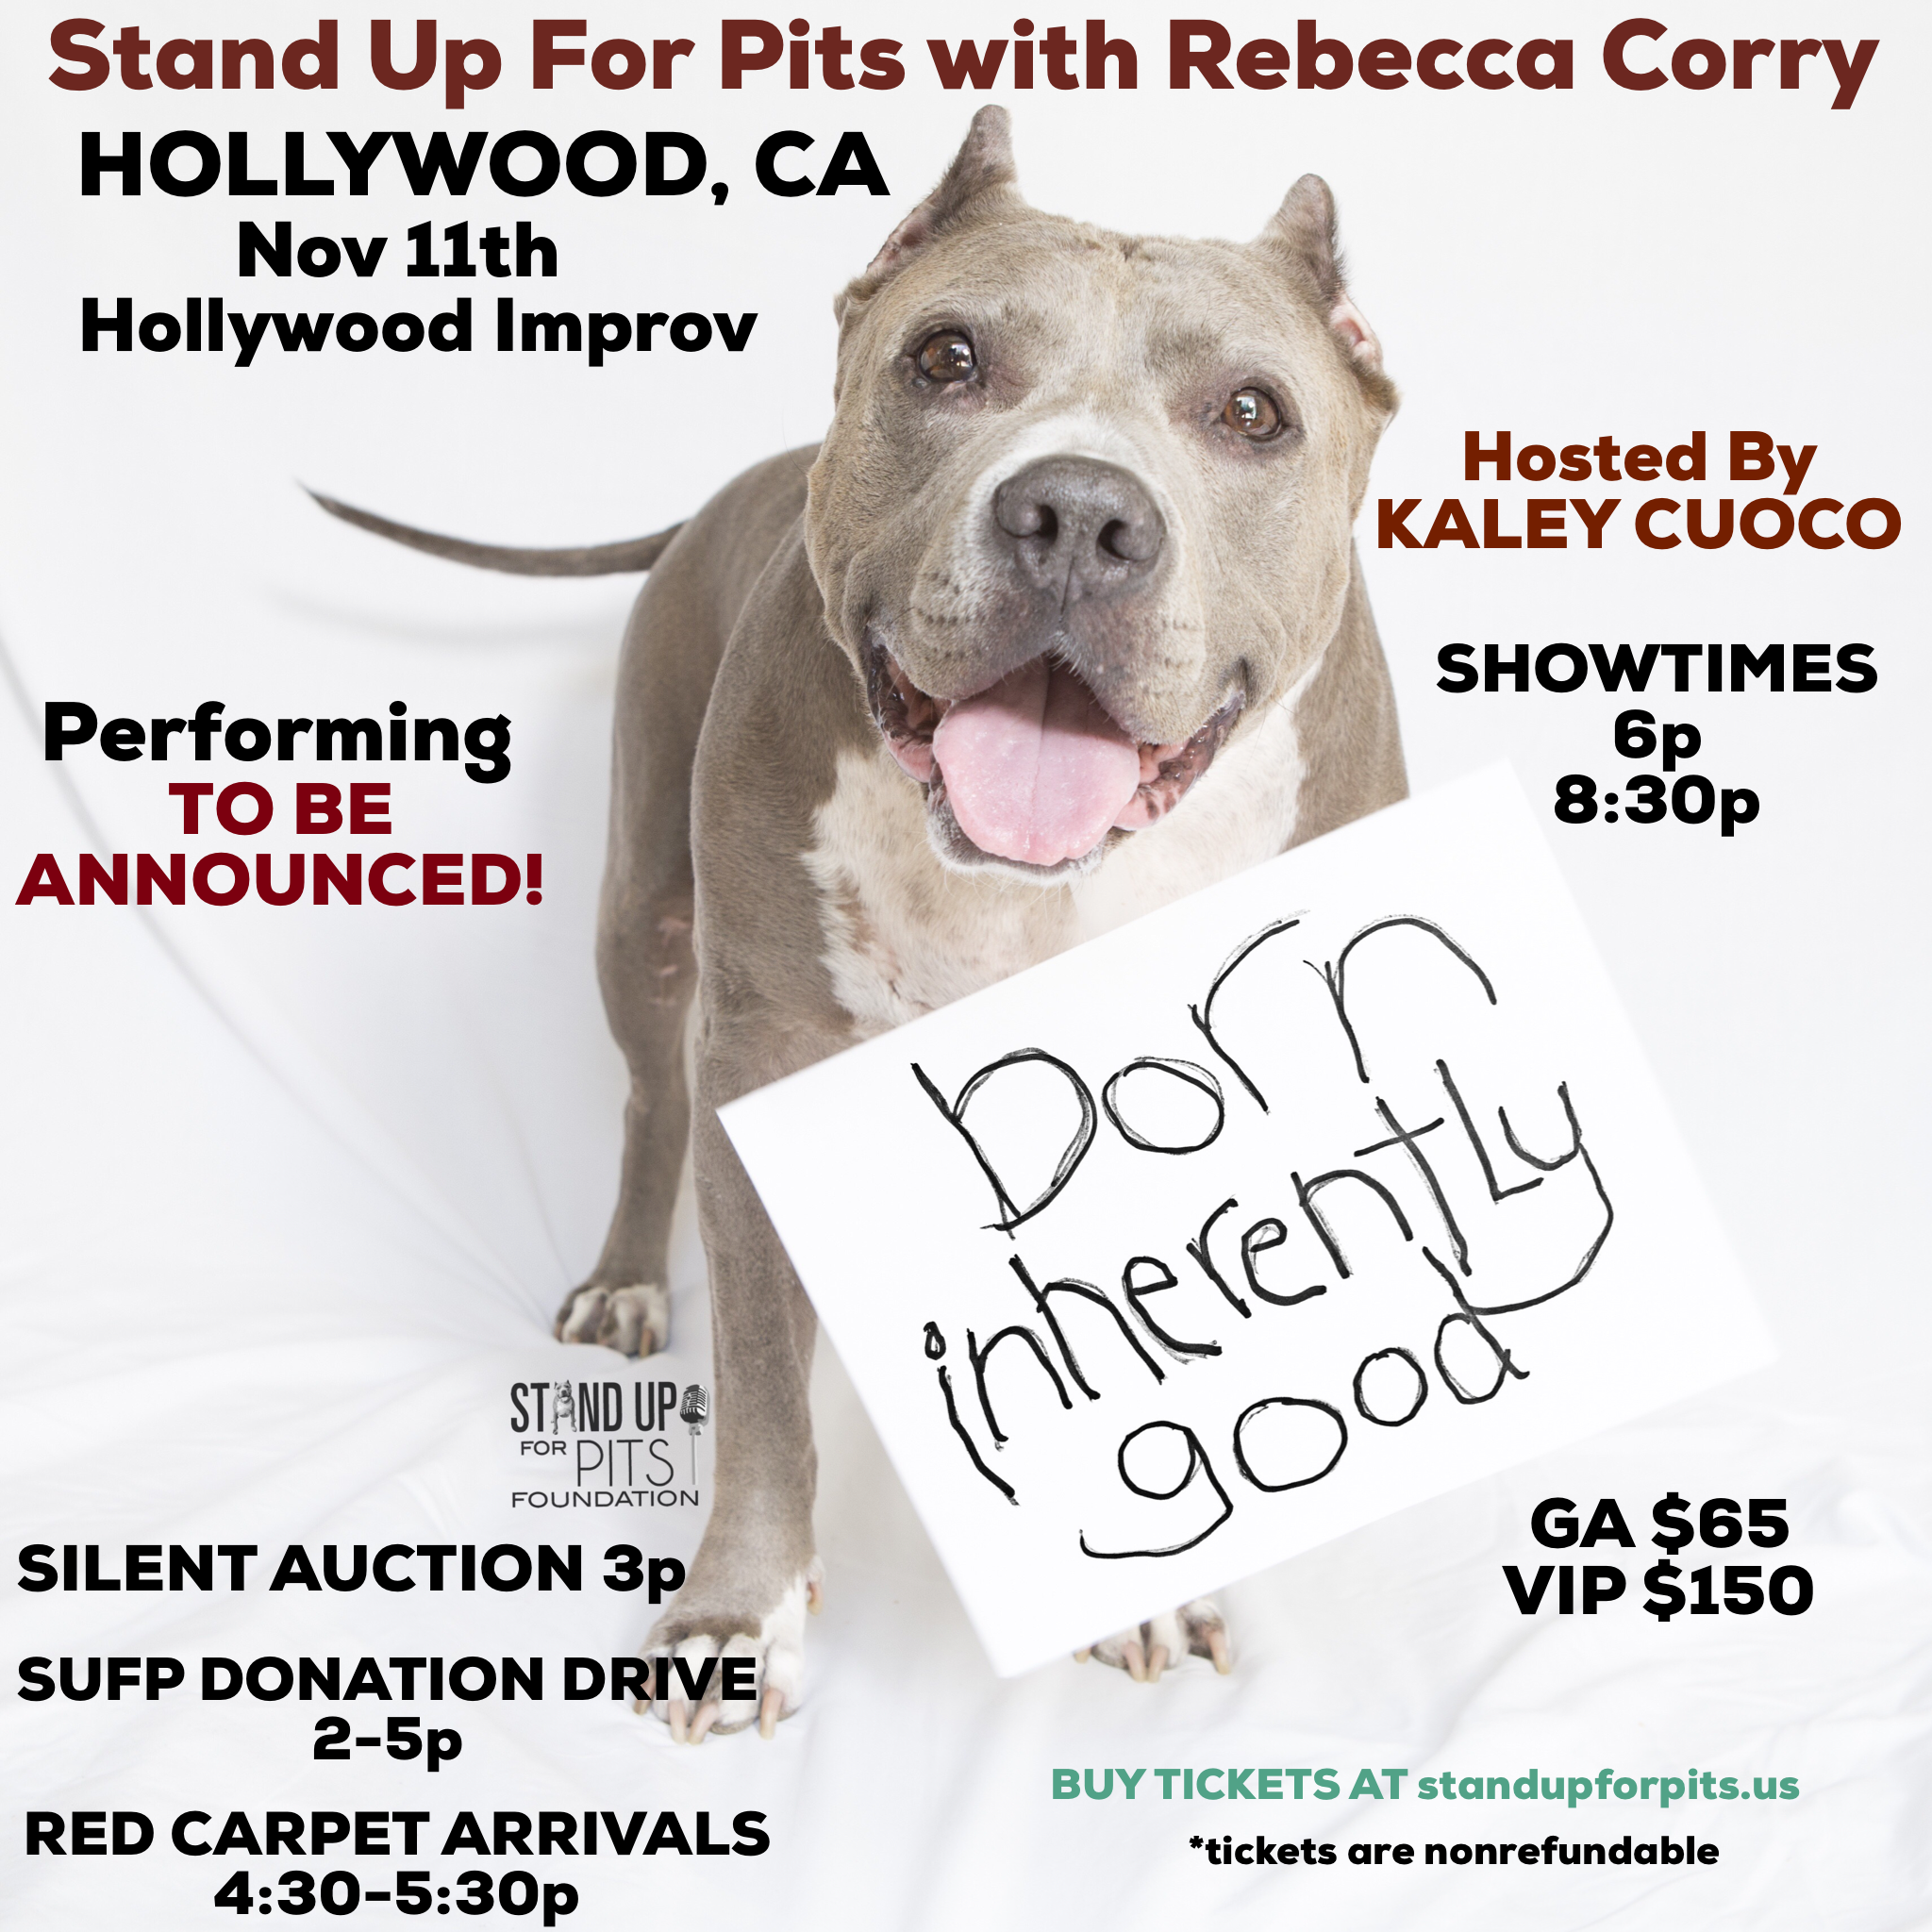 Stand Up For Pits HOLLYWOOD 6p show is SOLD OUT!! Some tickets left for 8:30p show!!!